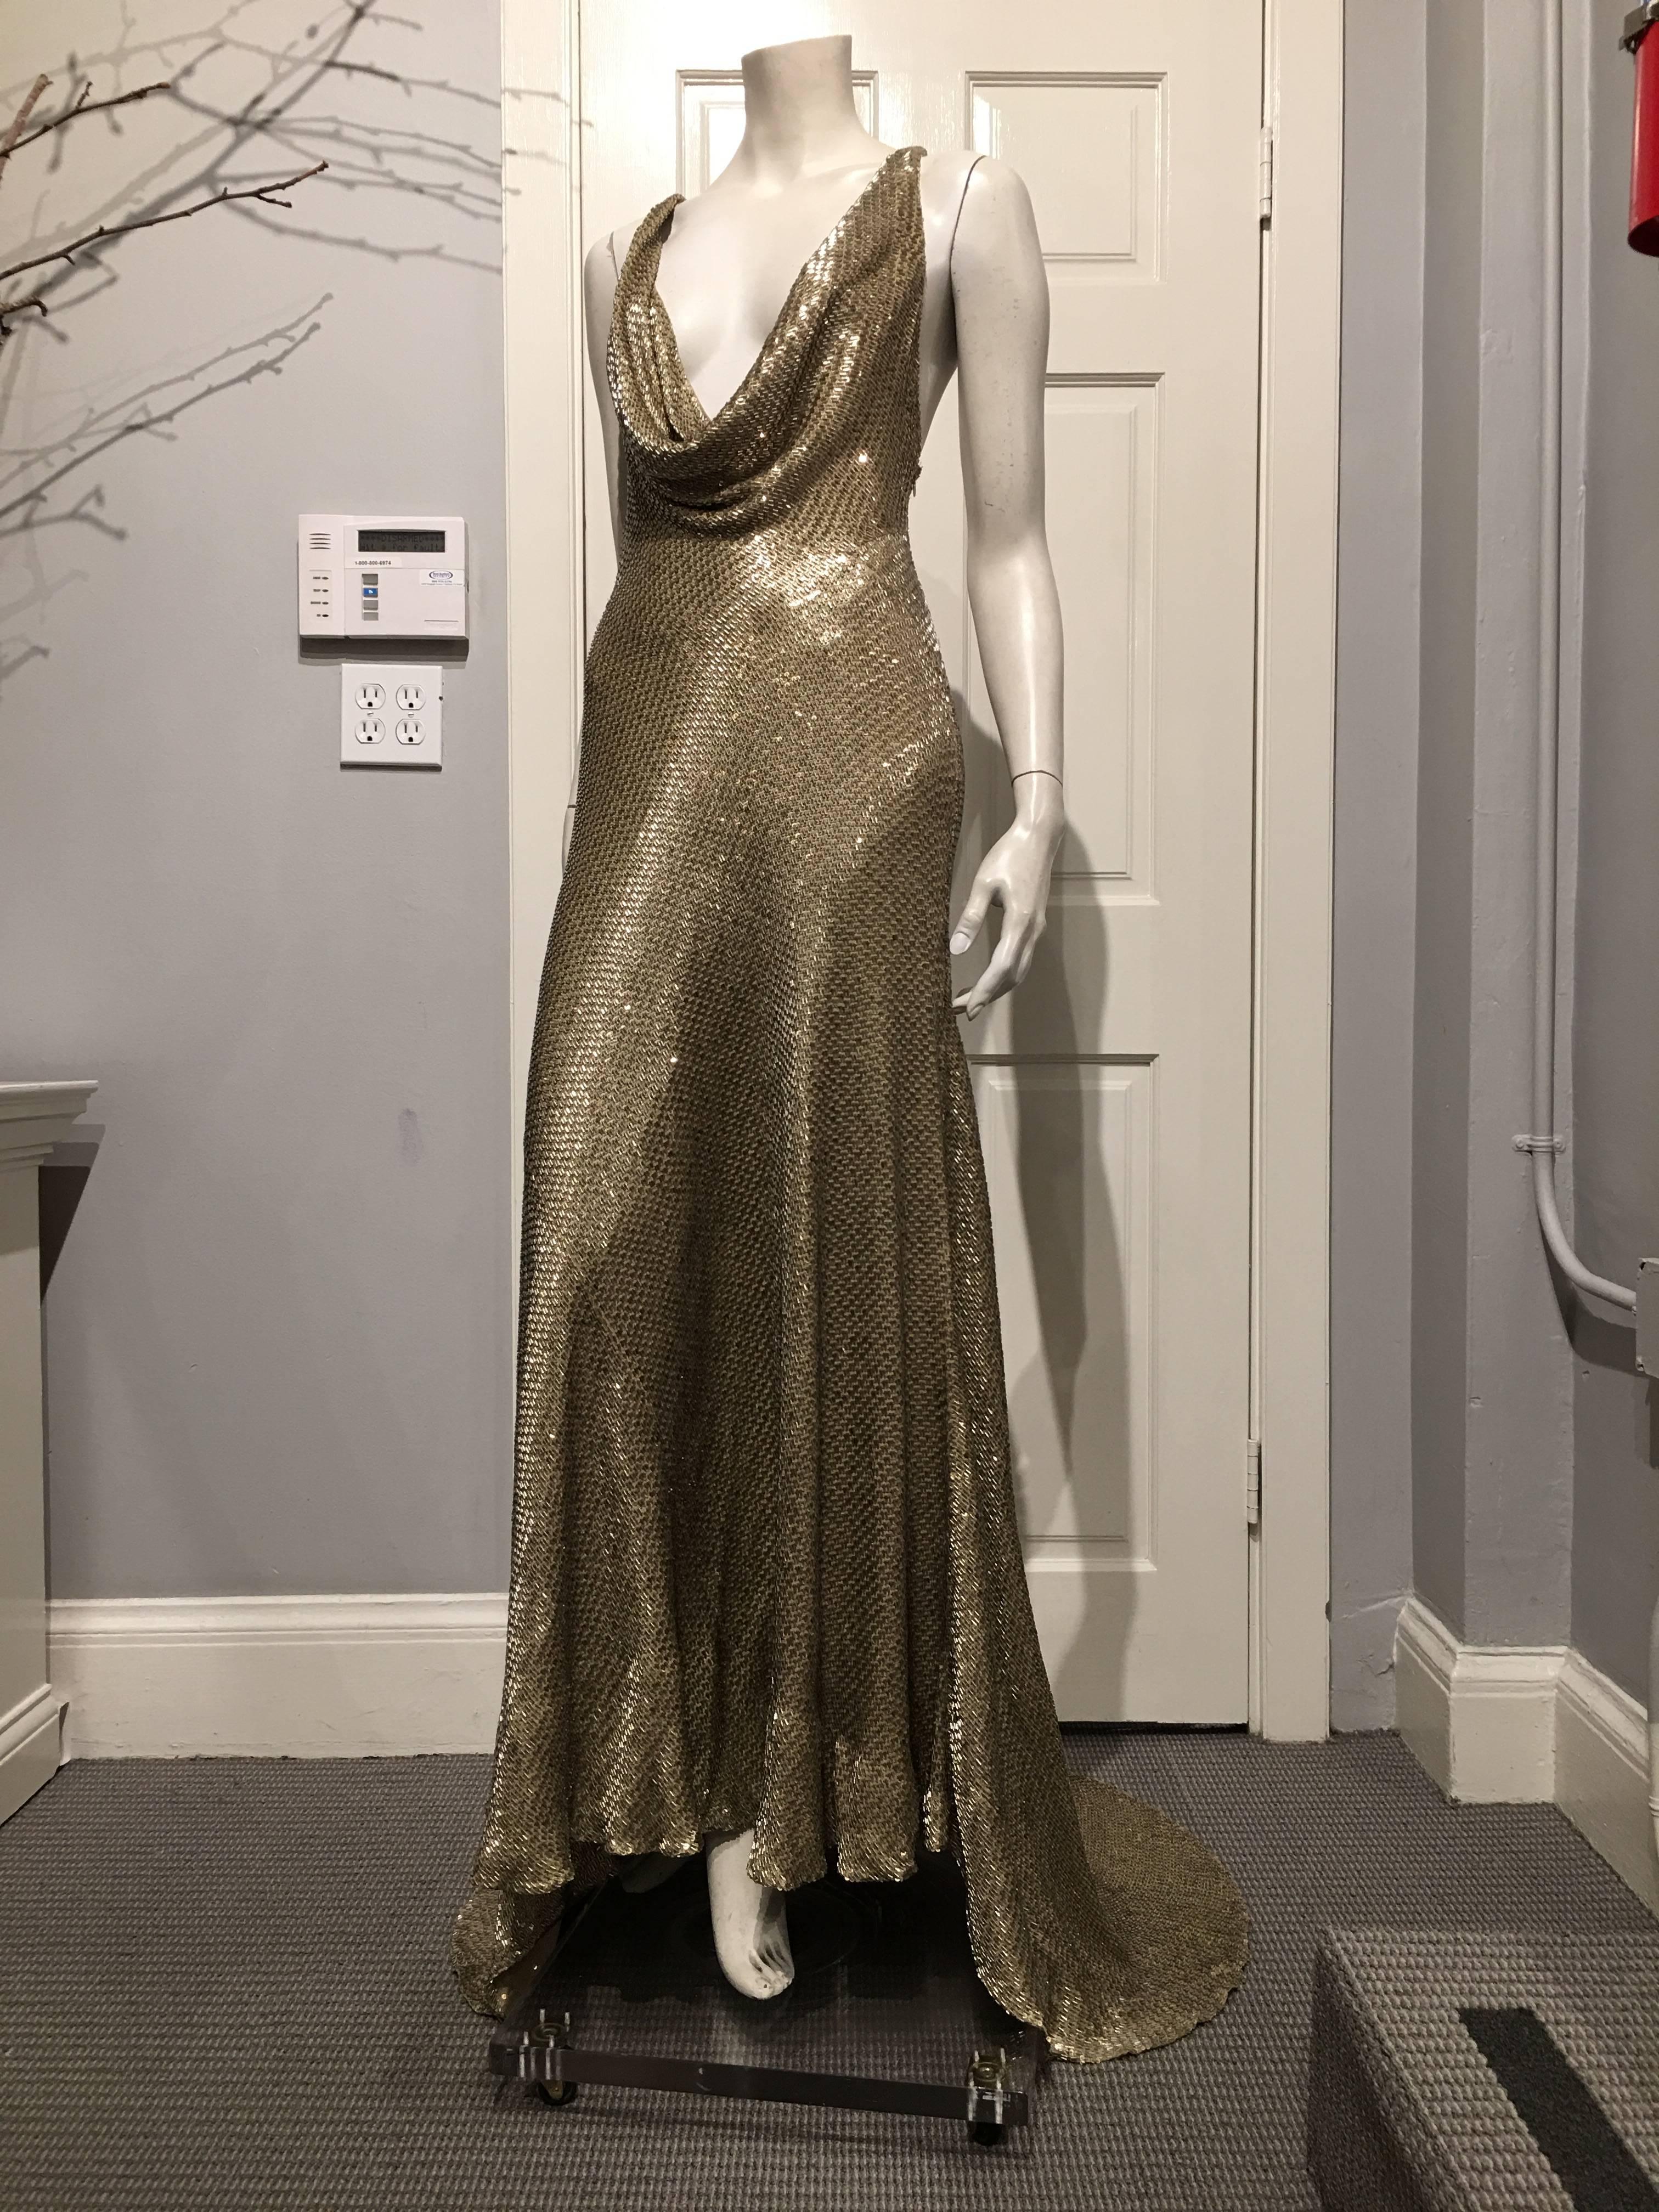 Ralph Lauren backless, sleeveless gown covered in gold beads and sequins.

The dress features a low cut draped neckline and train.